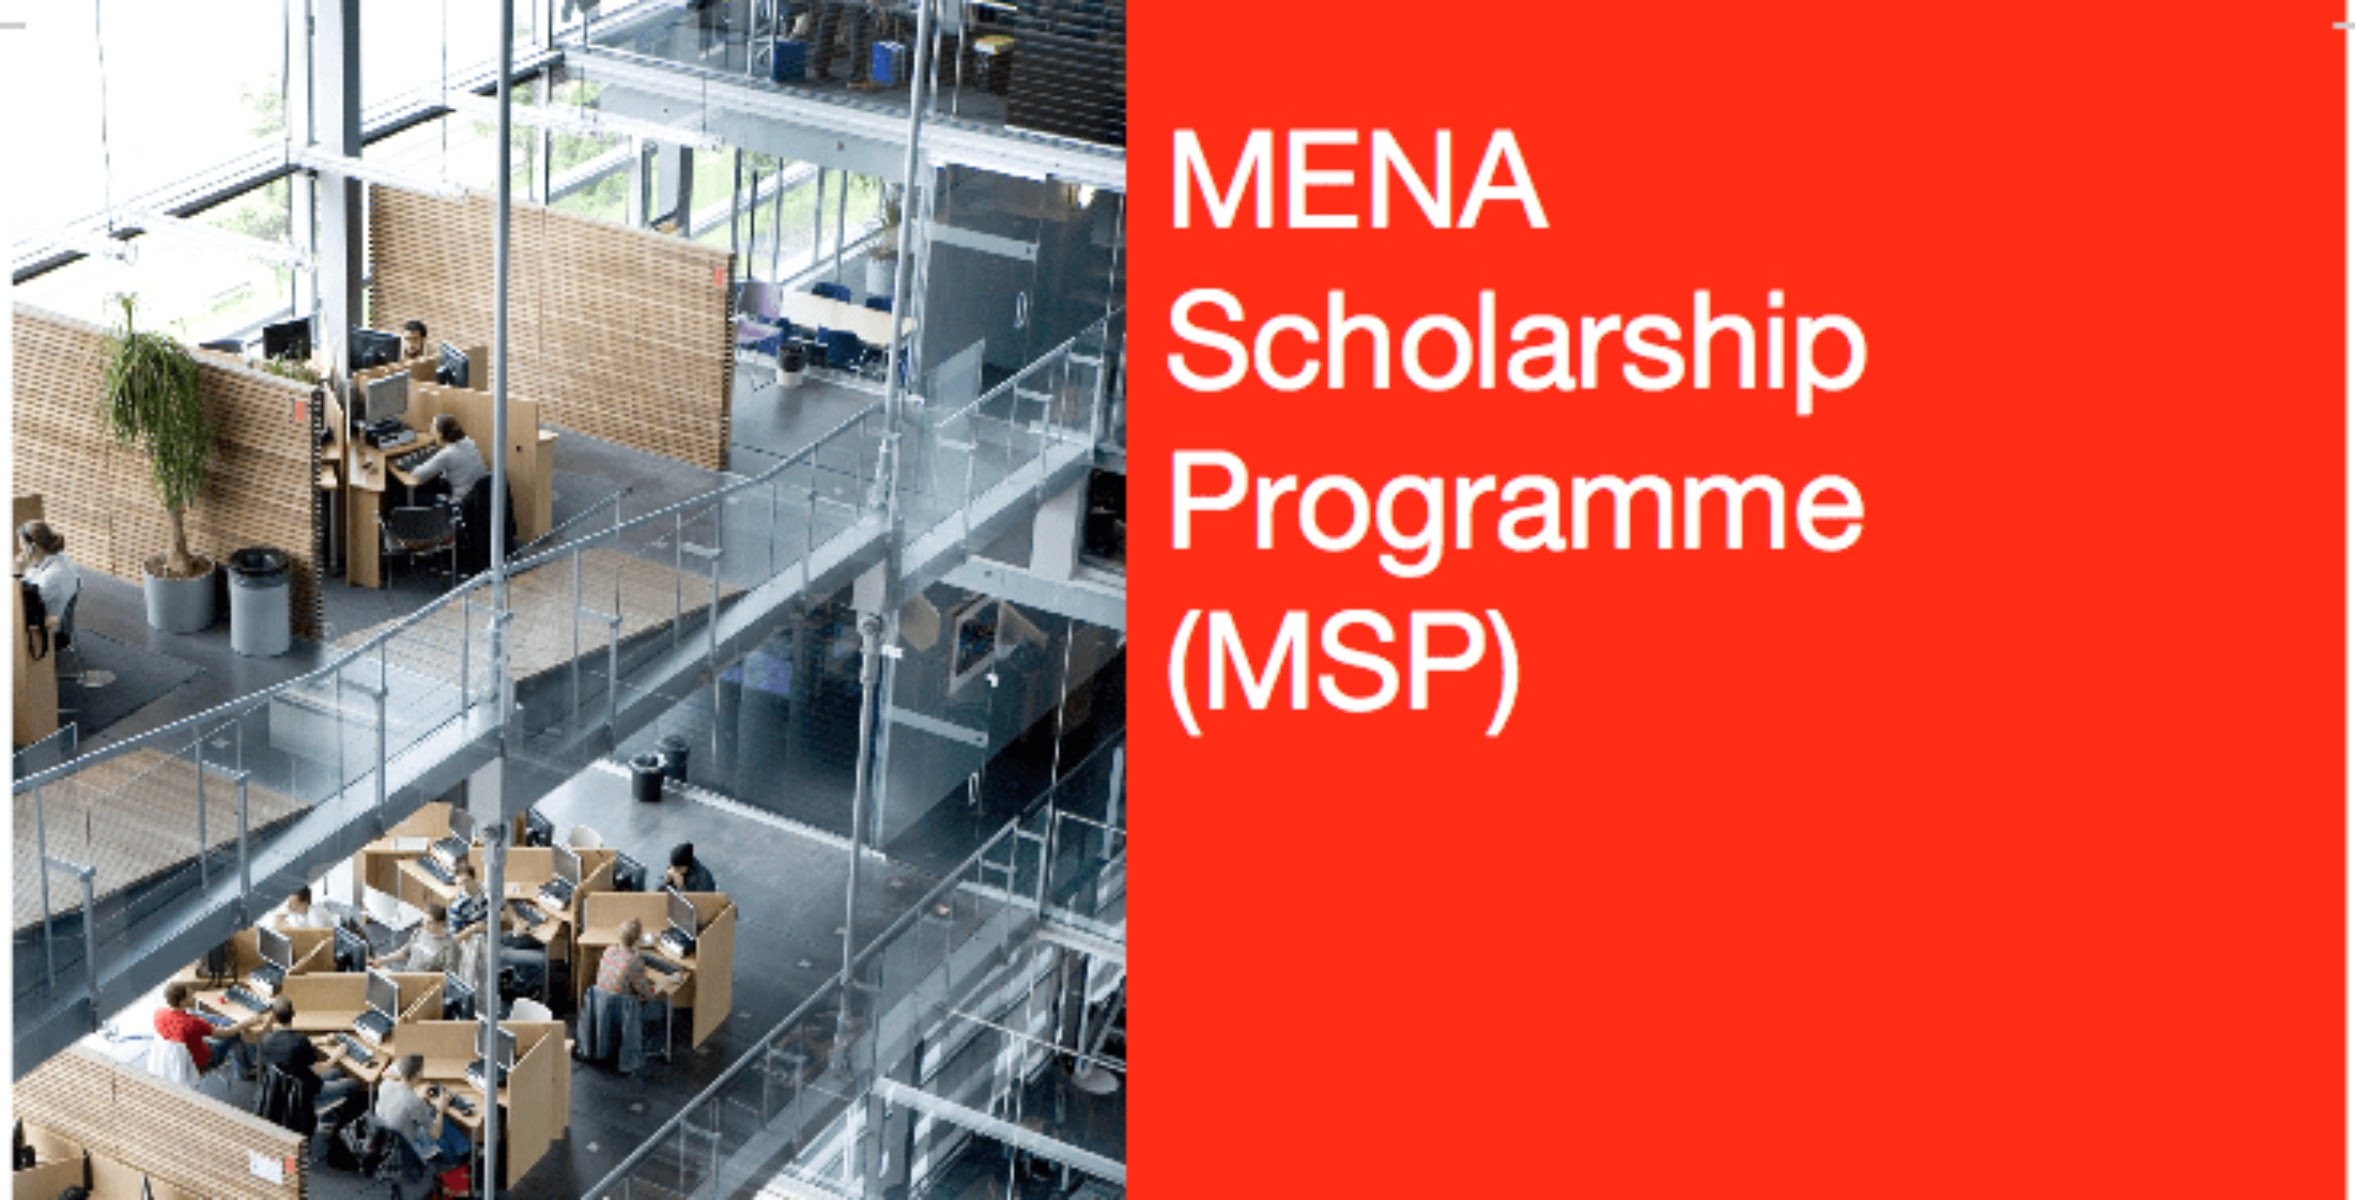 Fully Funded MENA Scholarship Programme 2024 to Study in Holland